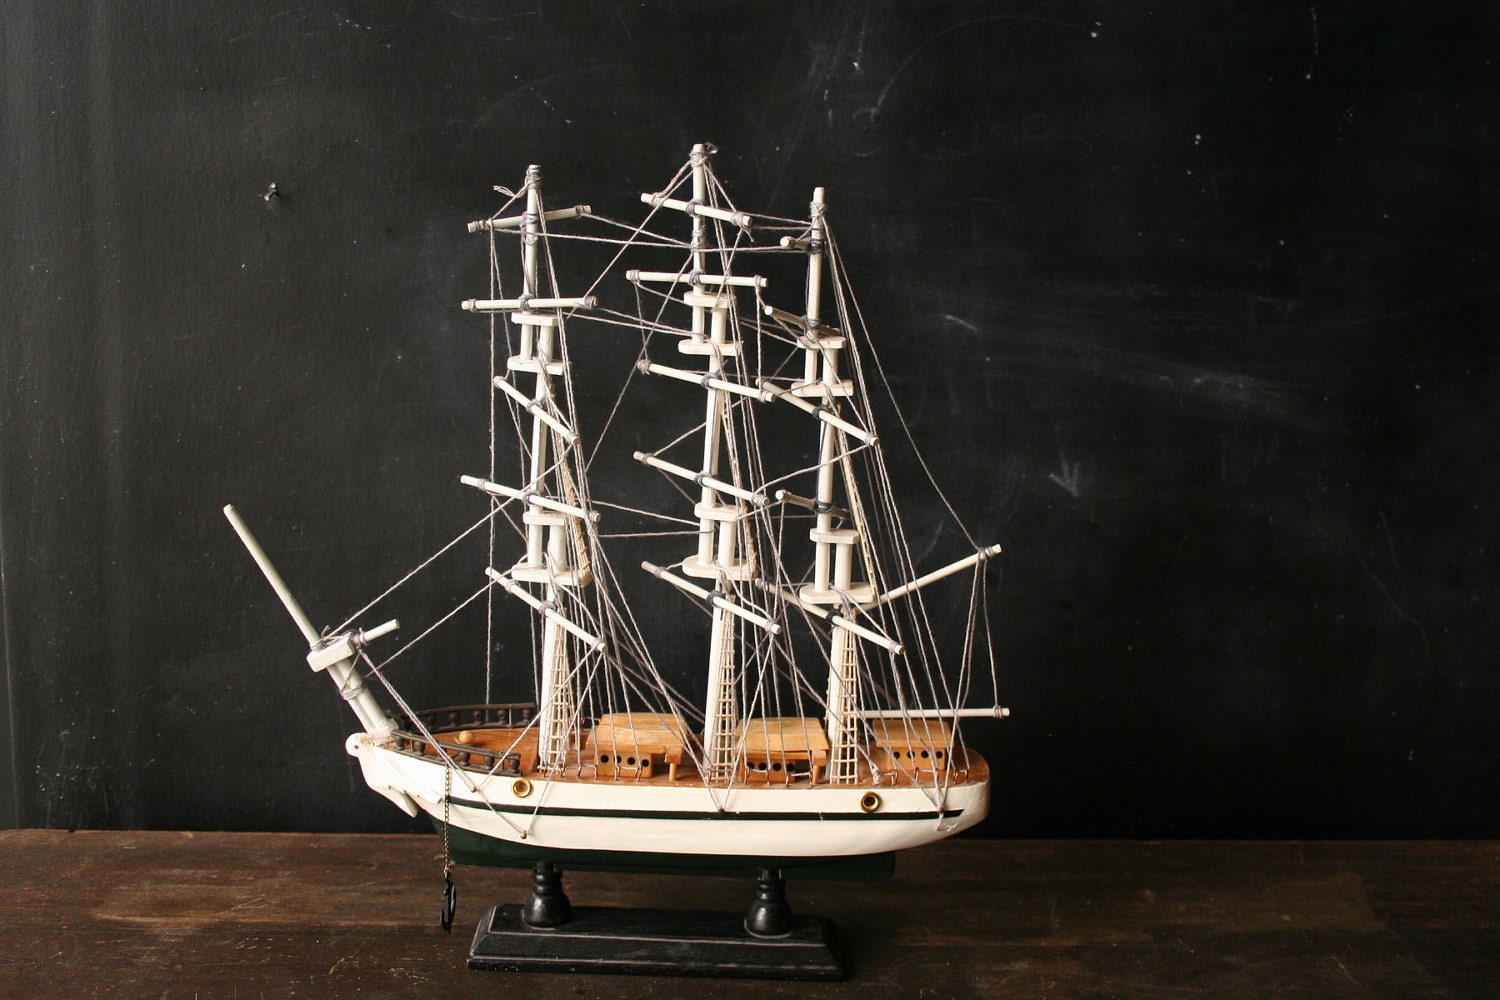 Sailboat Ship Model White 13 inches 3 Masts Vintage from Nowvintage on Etsy